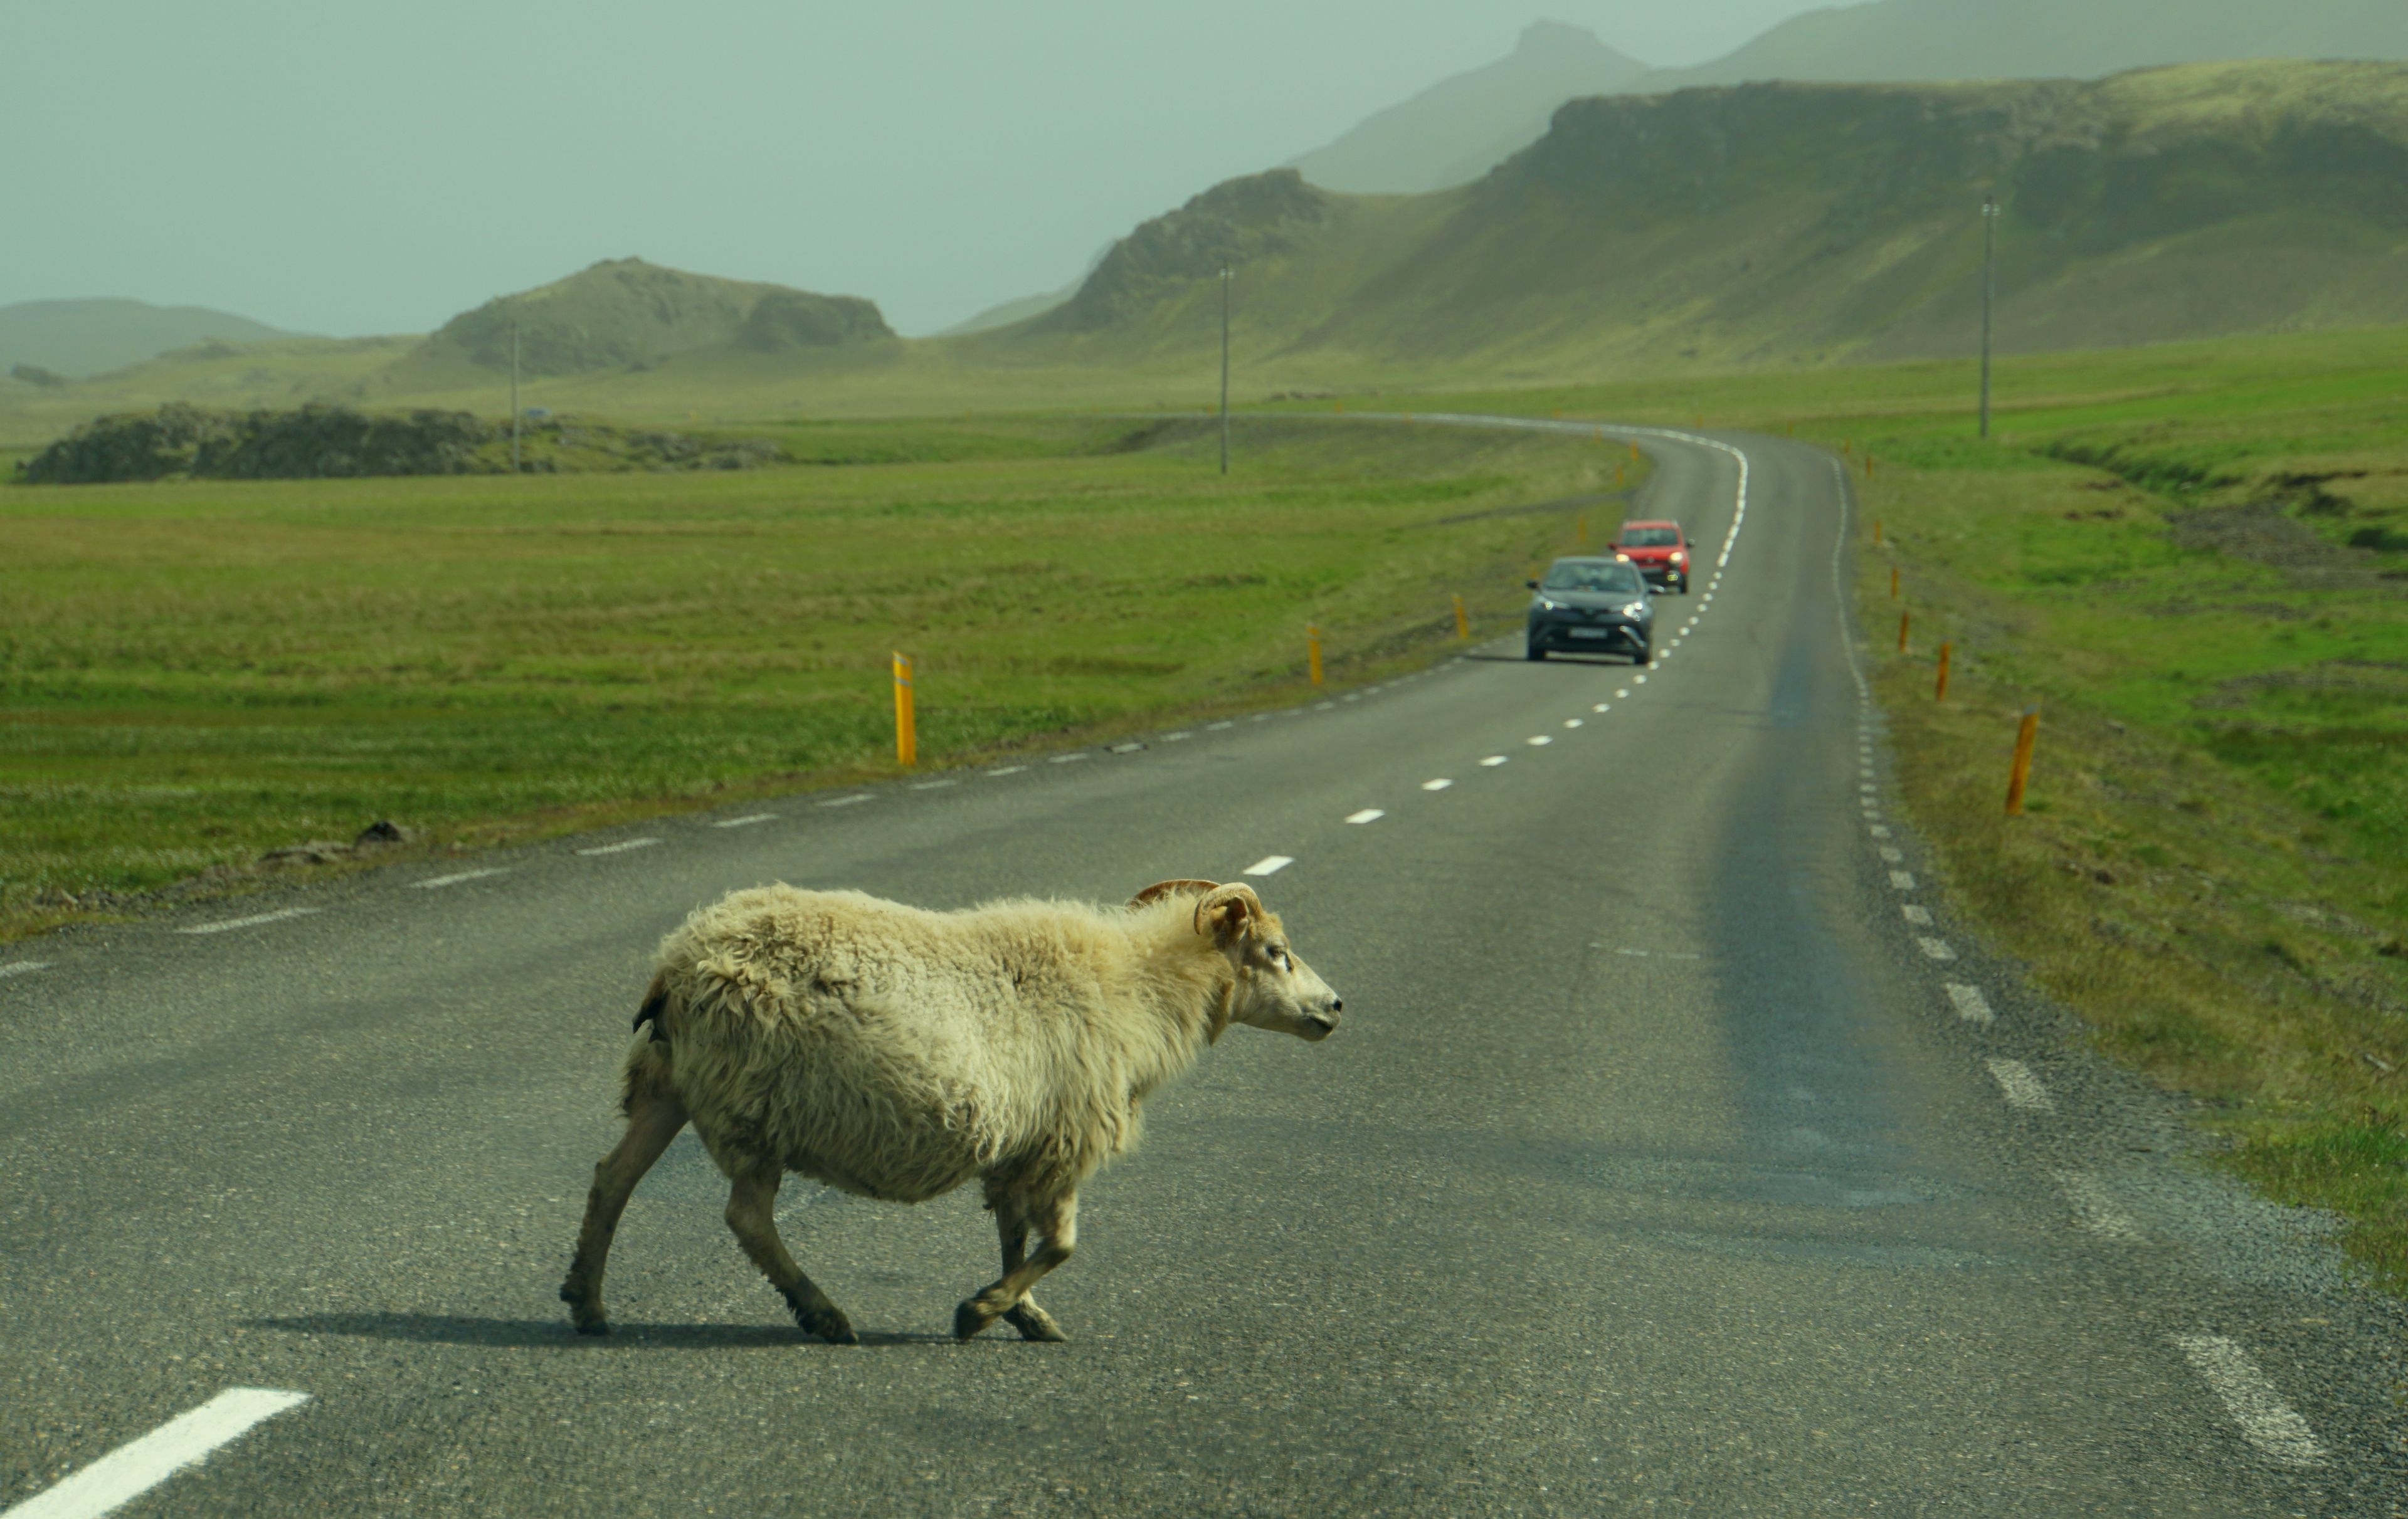 A group of sheep crossing a rural road in the scenic landscapes of Iceland